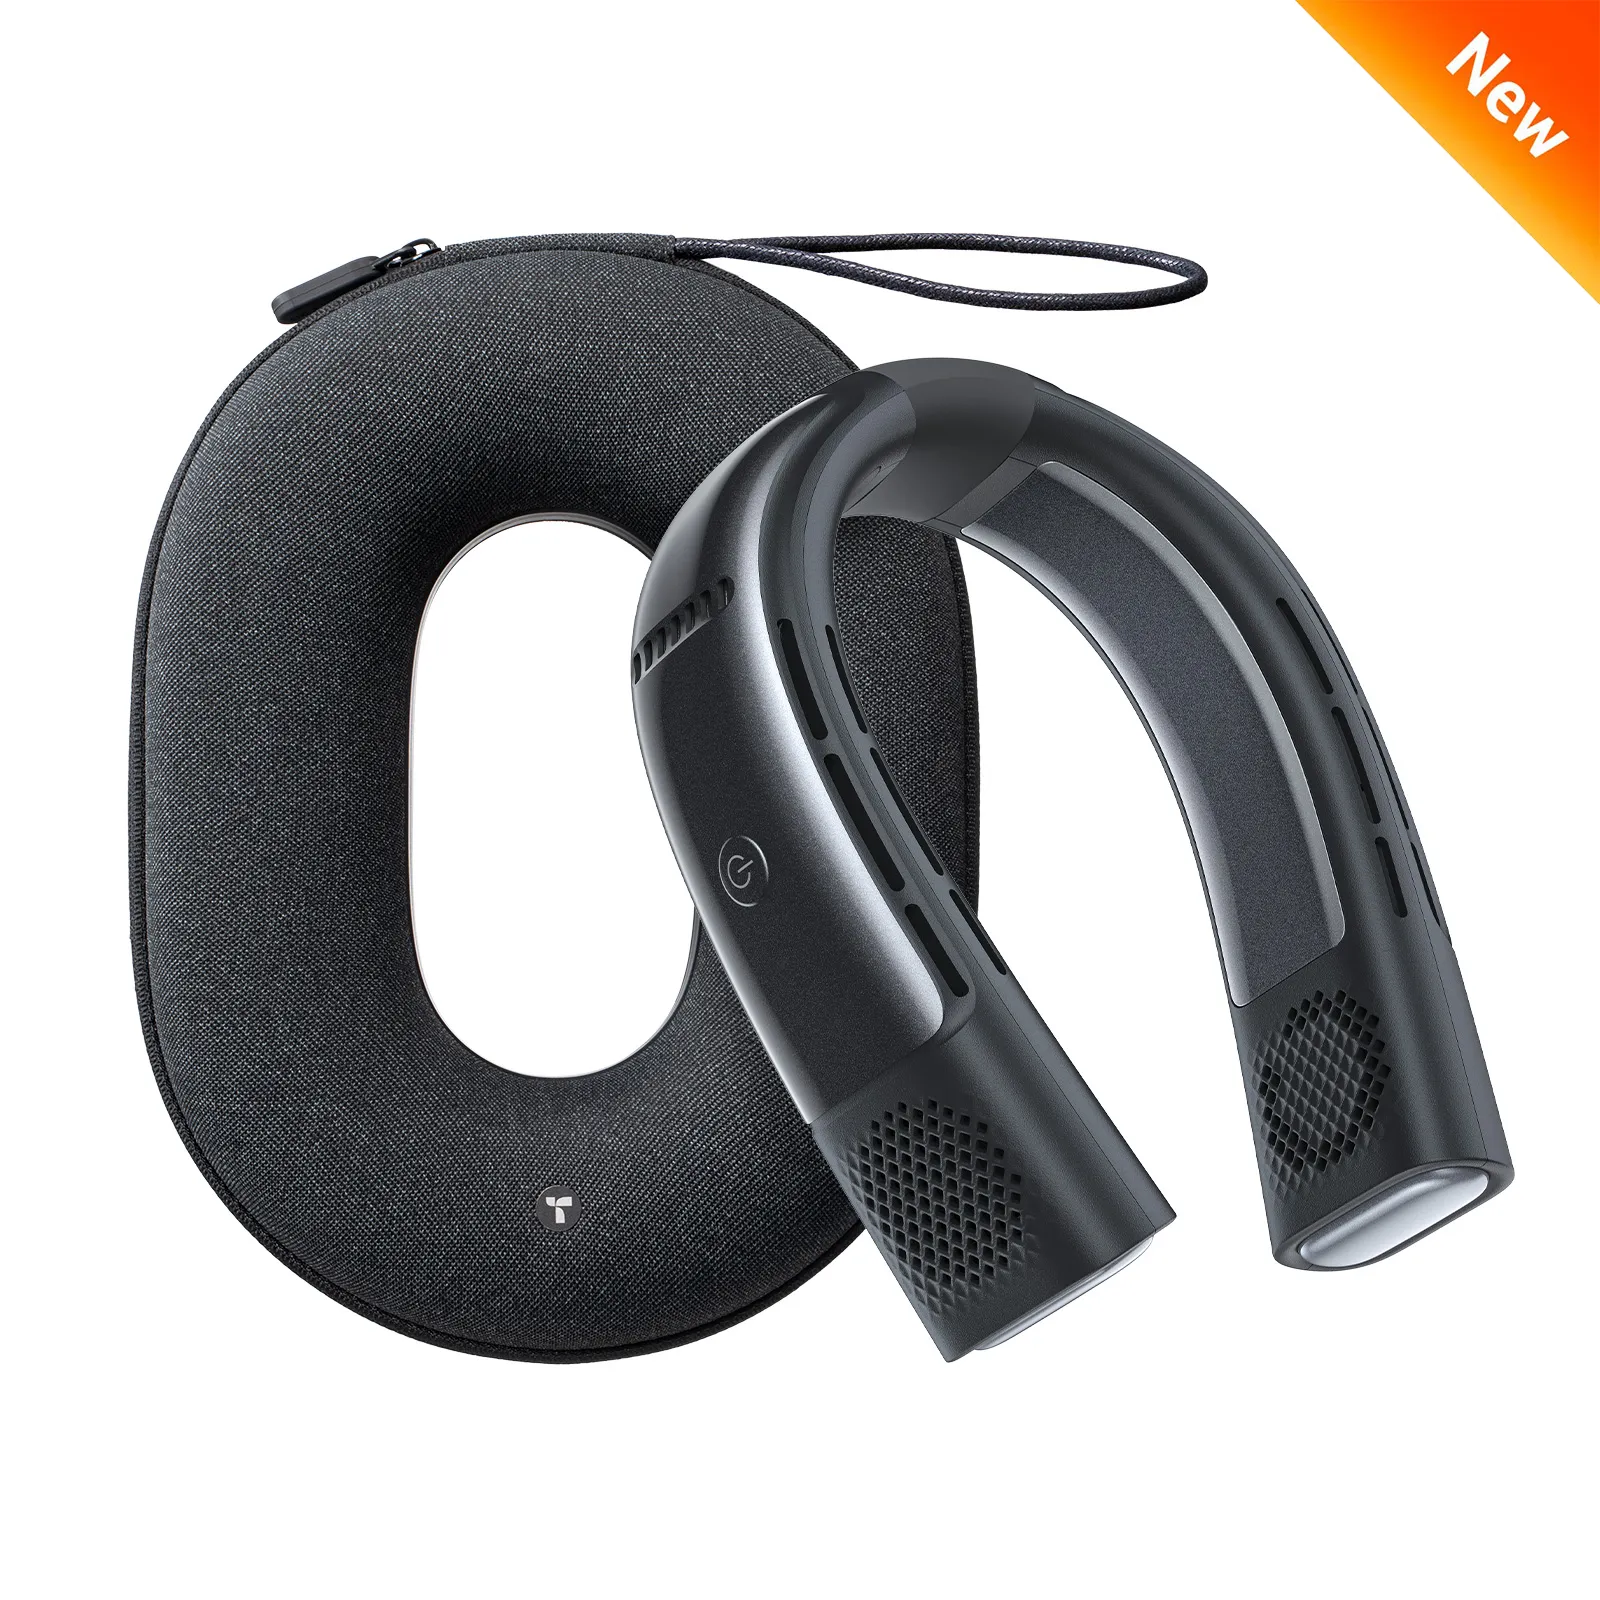 TORRAS COOLIFY 2S Wearable Neck Air Conditioner-Ultra Long Battery 